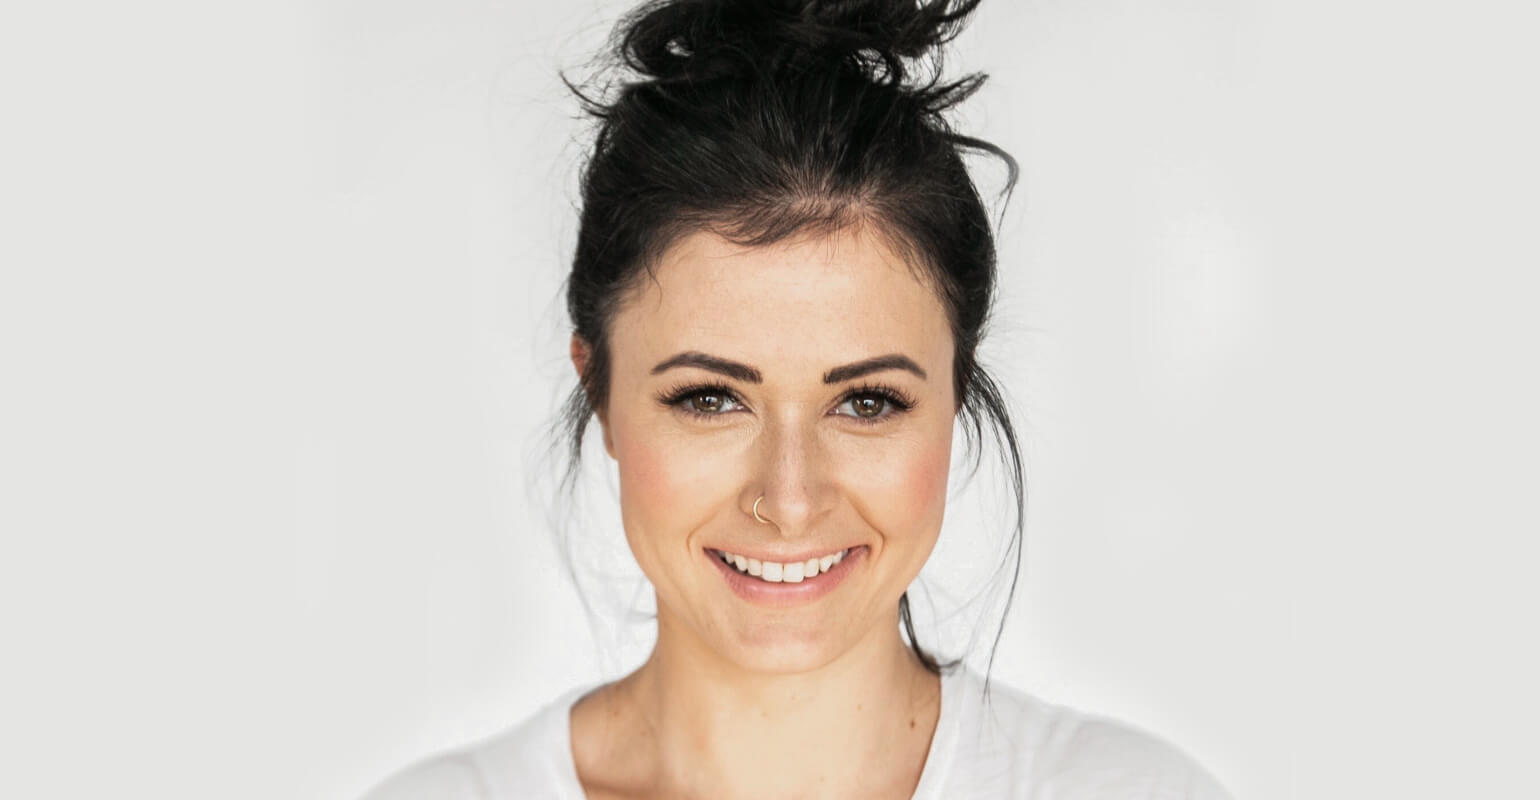 A smiling woman with her hair up